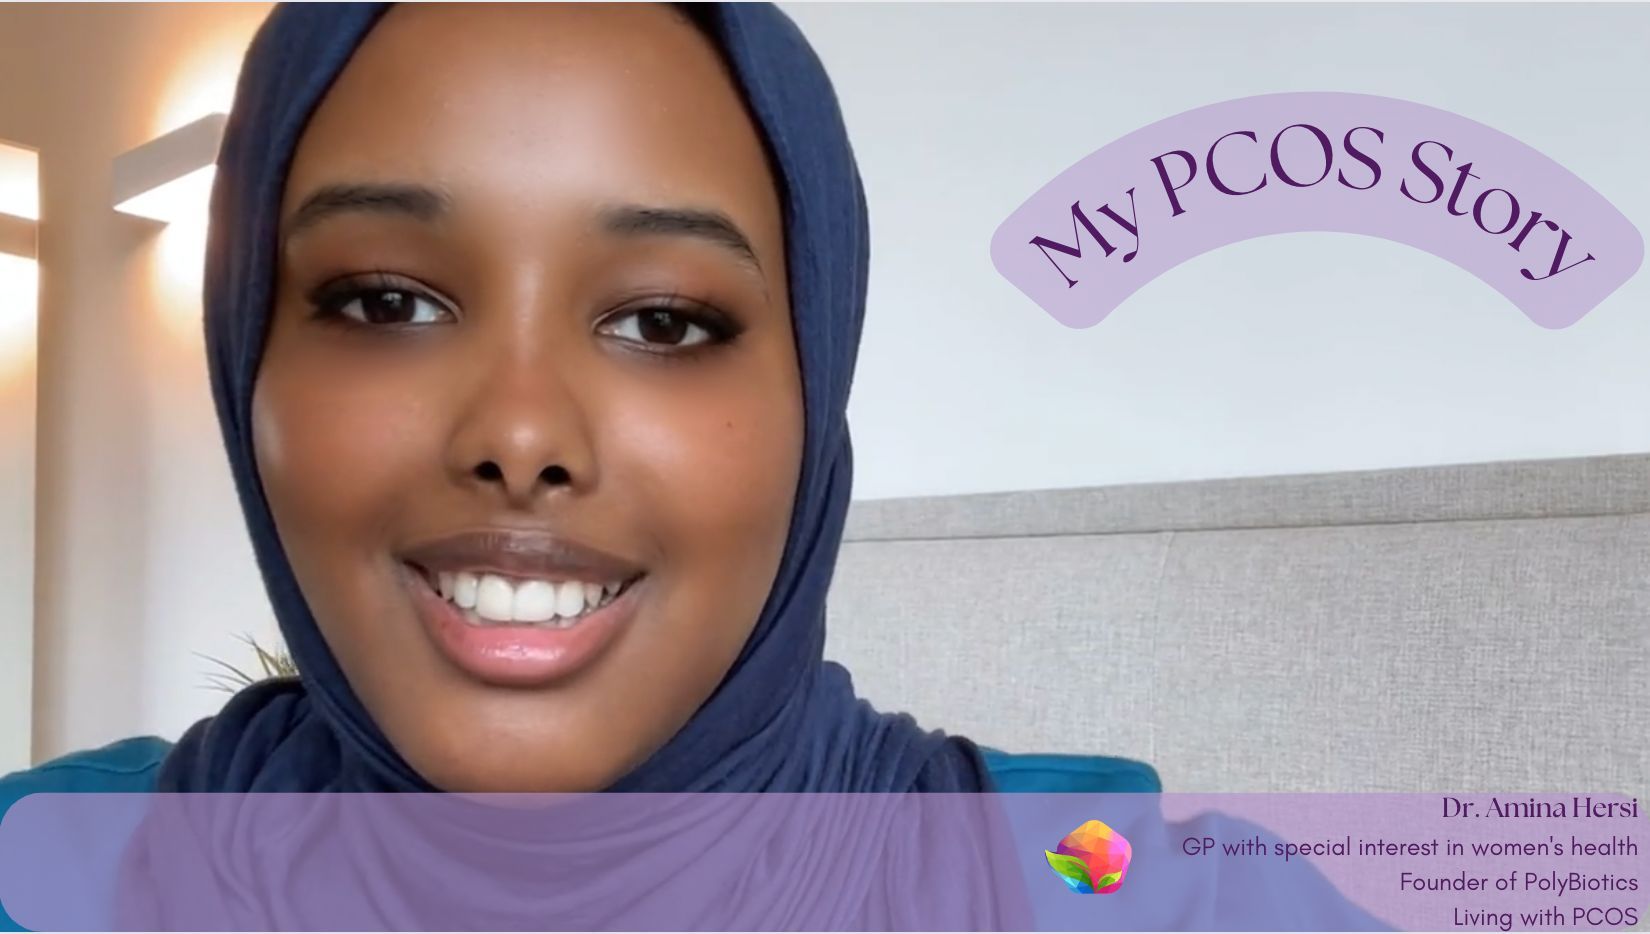 Video of Dr. Amina Hersi GP with a special interest in Women's health. My PCOS story.